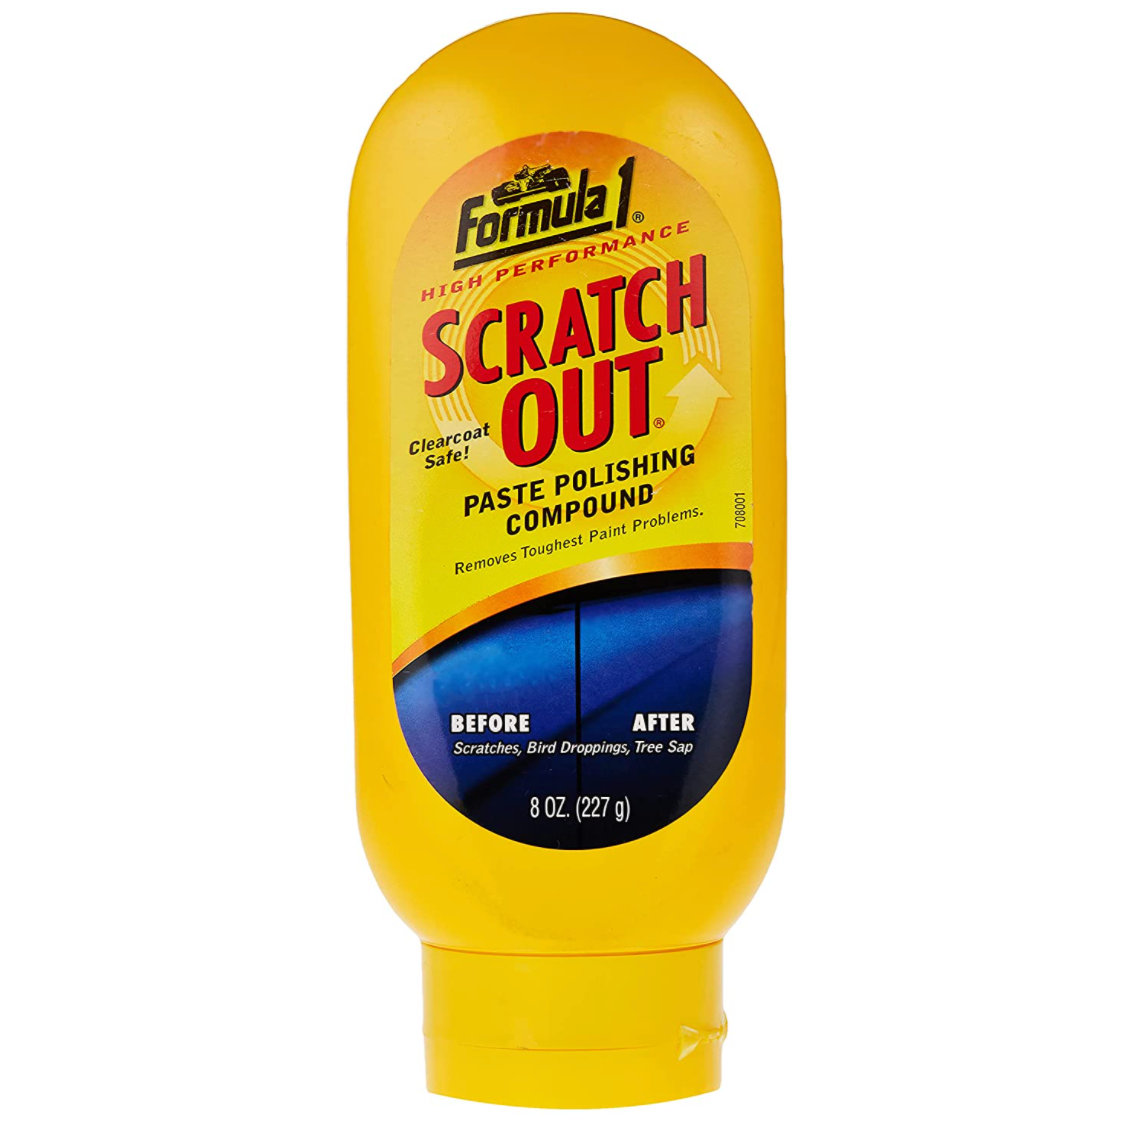 Formula 1 Scratch Out Paste Wax - Scratch Remover for All Auto Paint Finishes - 8 oz.